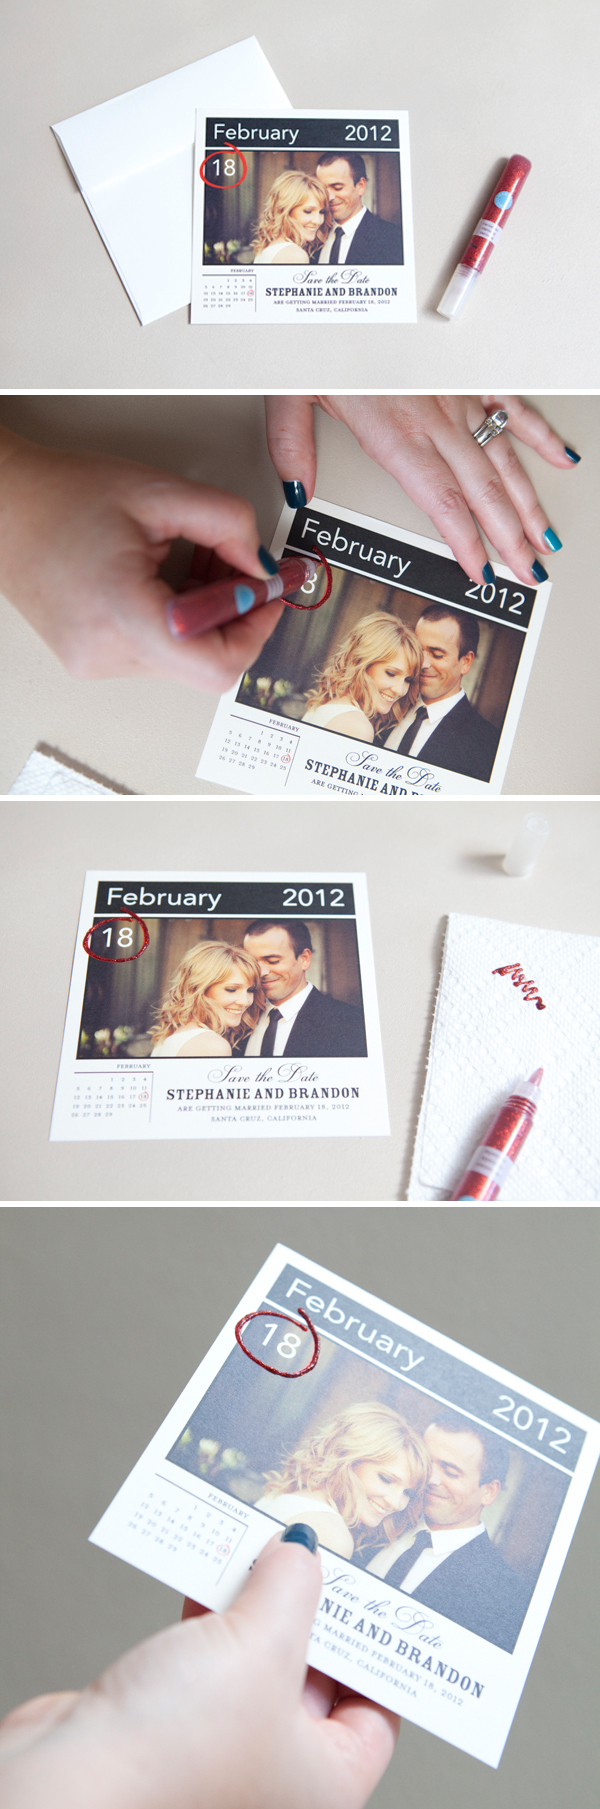 How to embellish store bought save the dates!